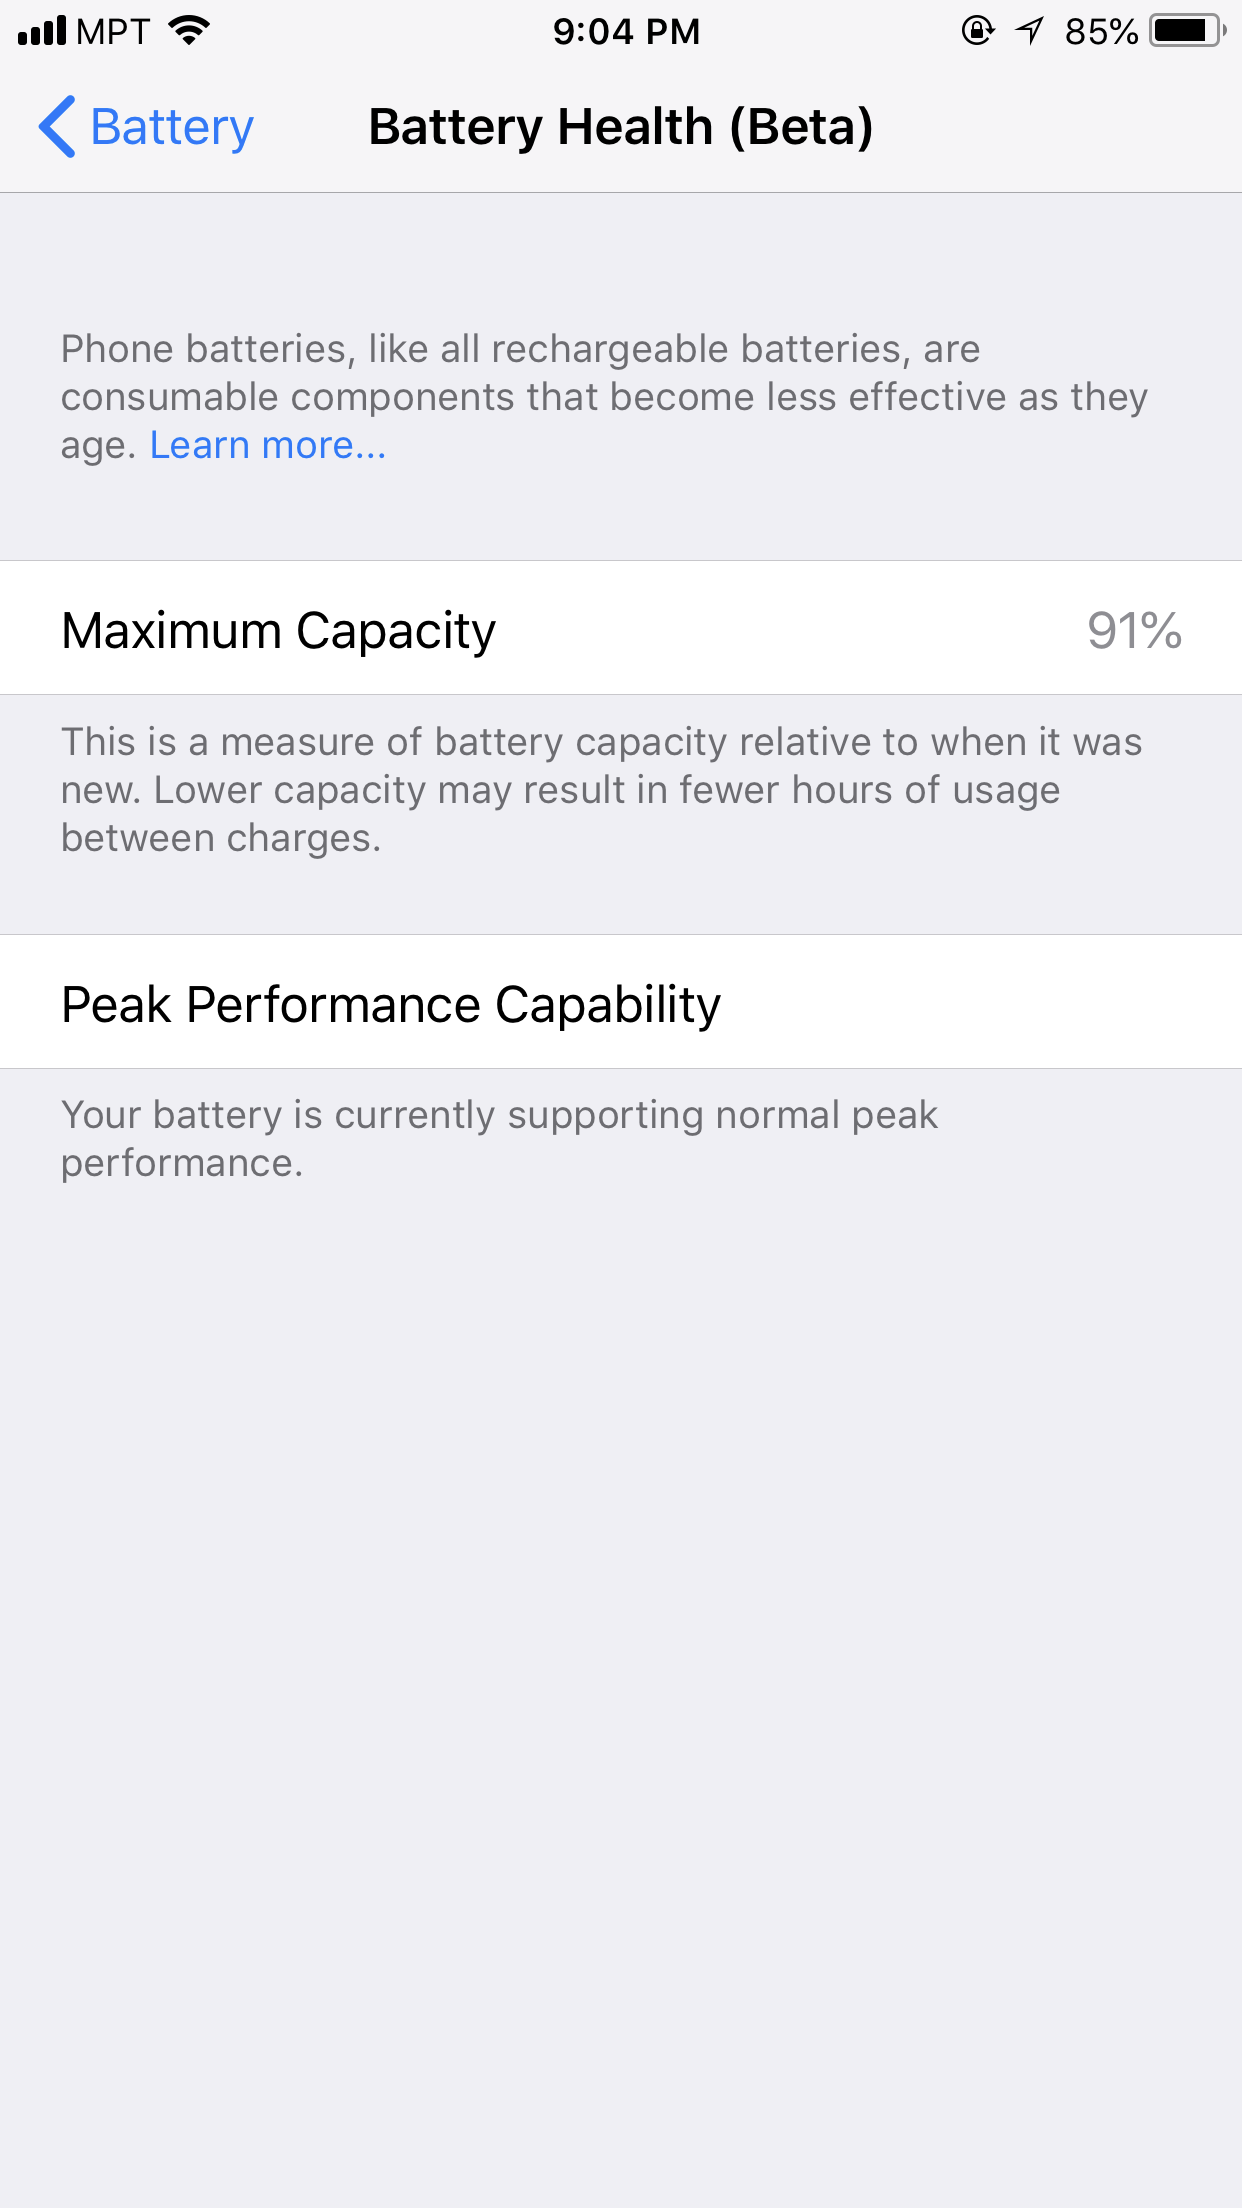 Is 91% battery health good?